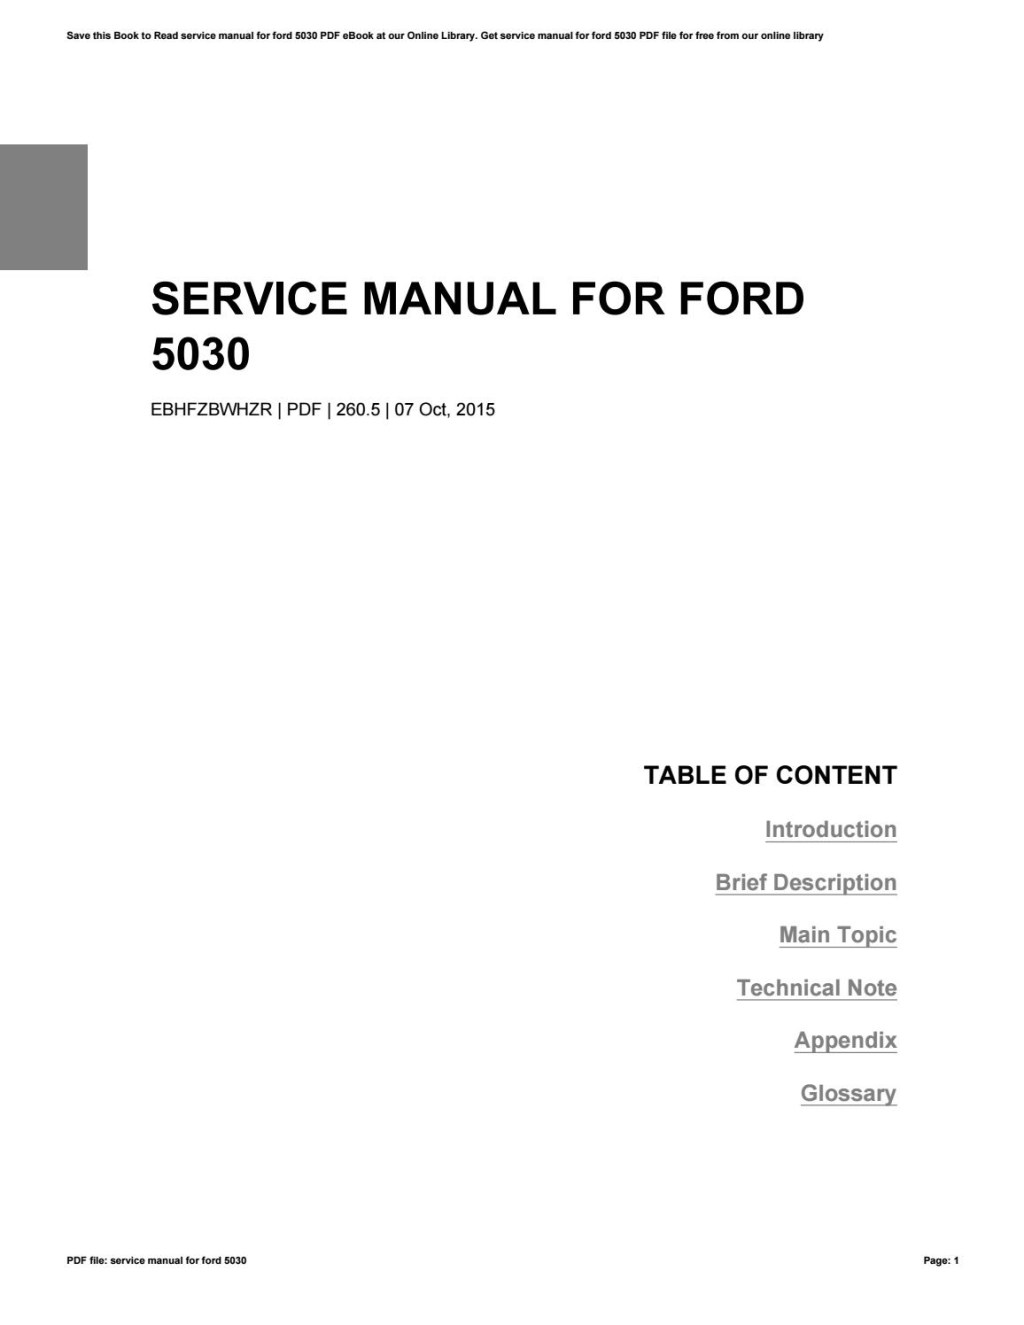 Picture of: Service manual for ford  by Helen – Issuu